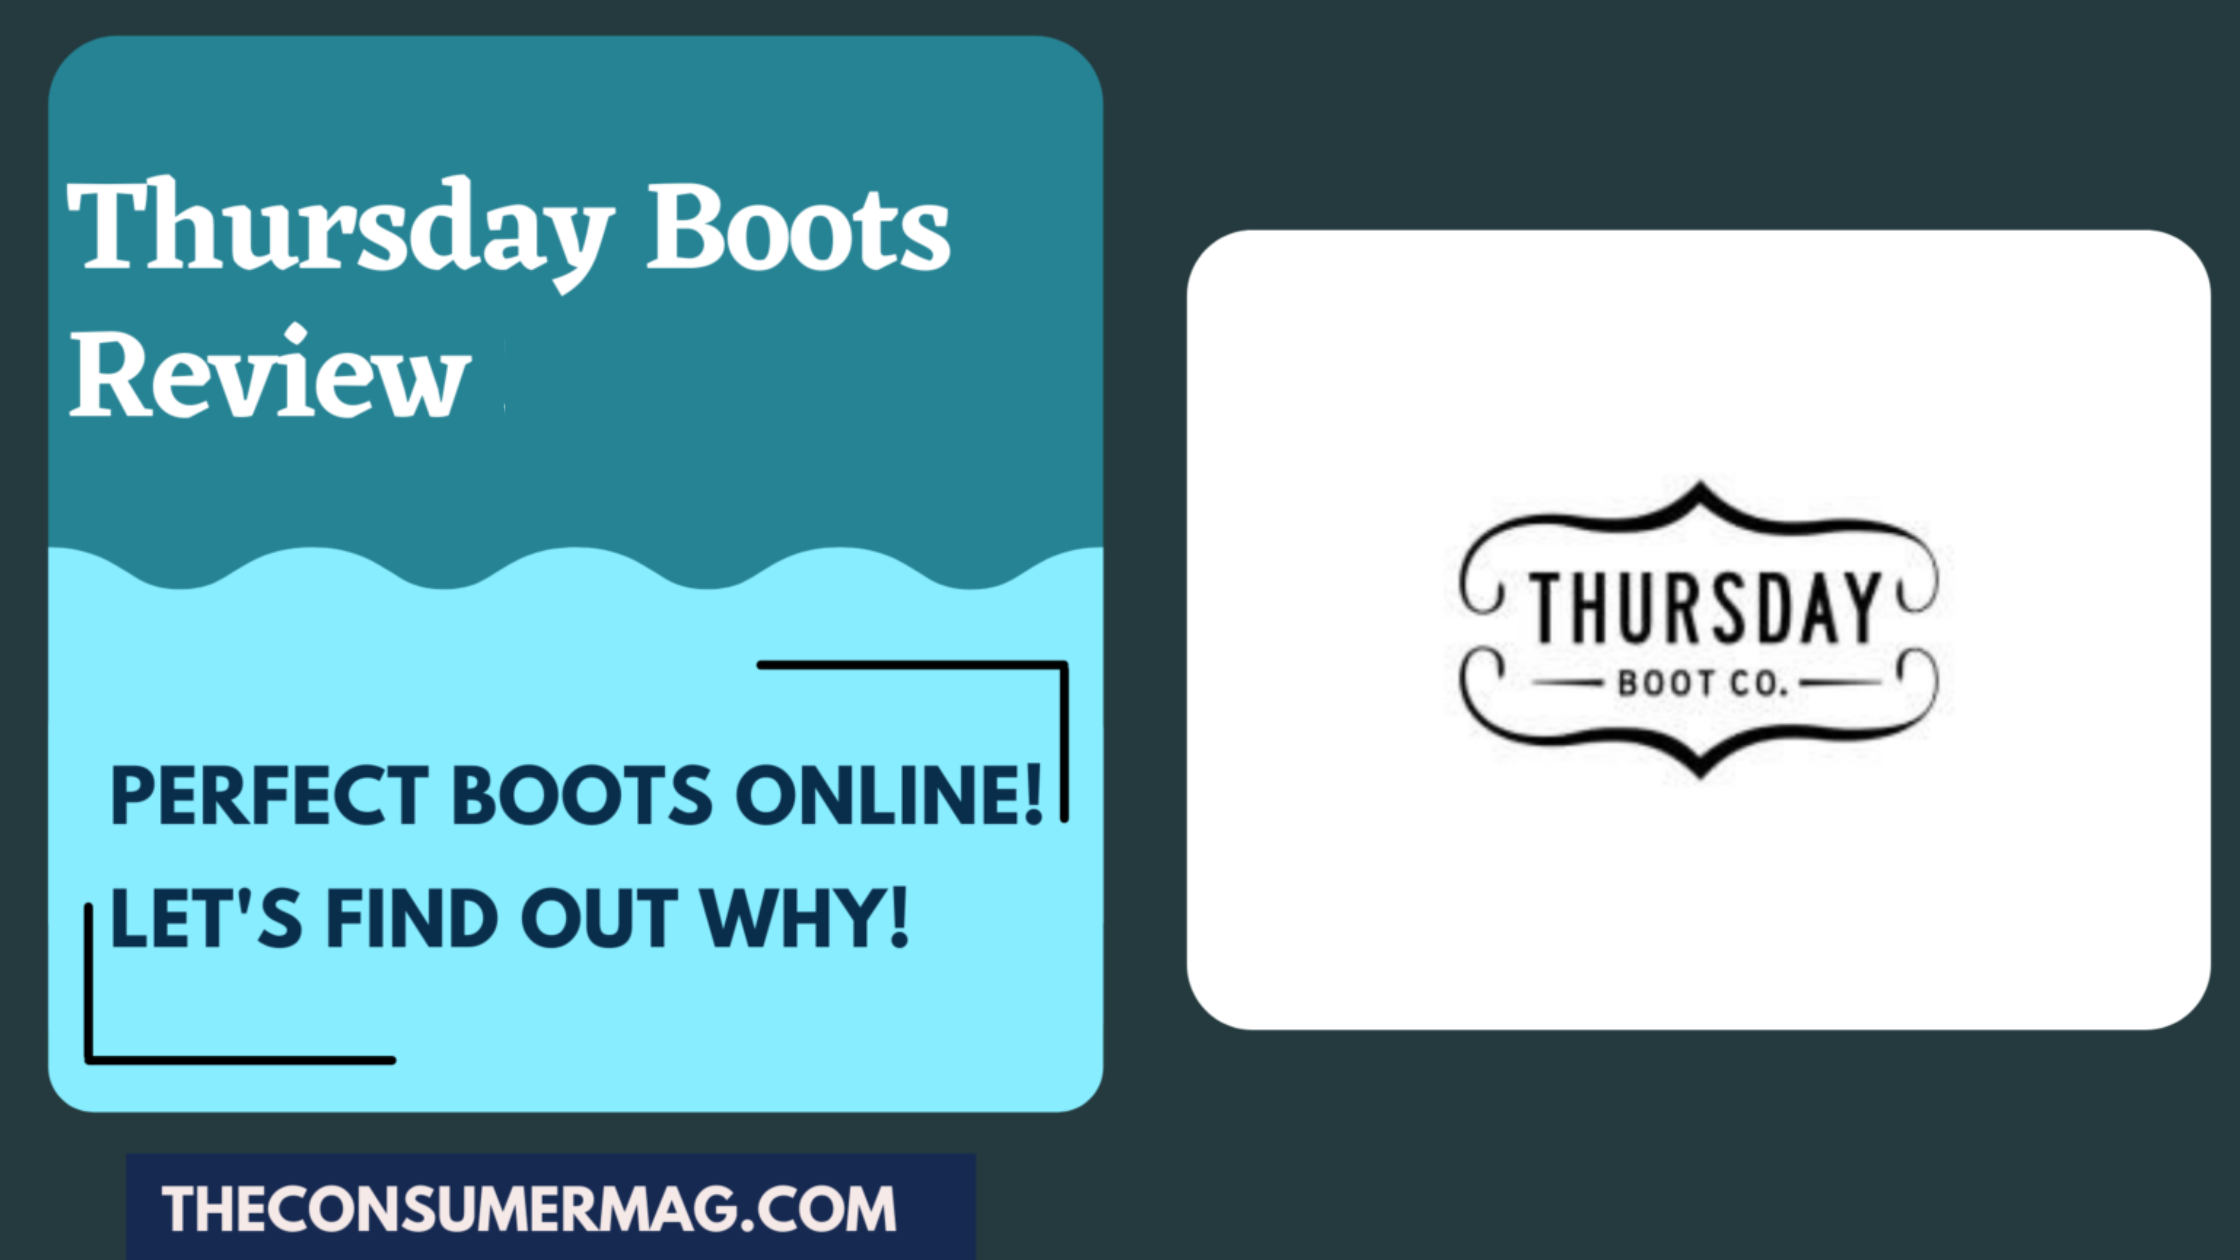 Thursday Boots featured image